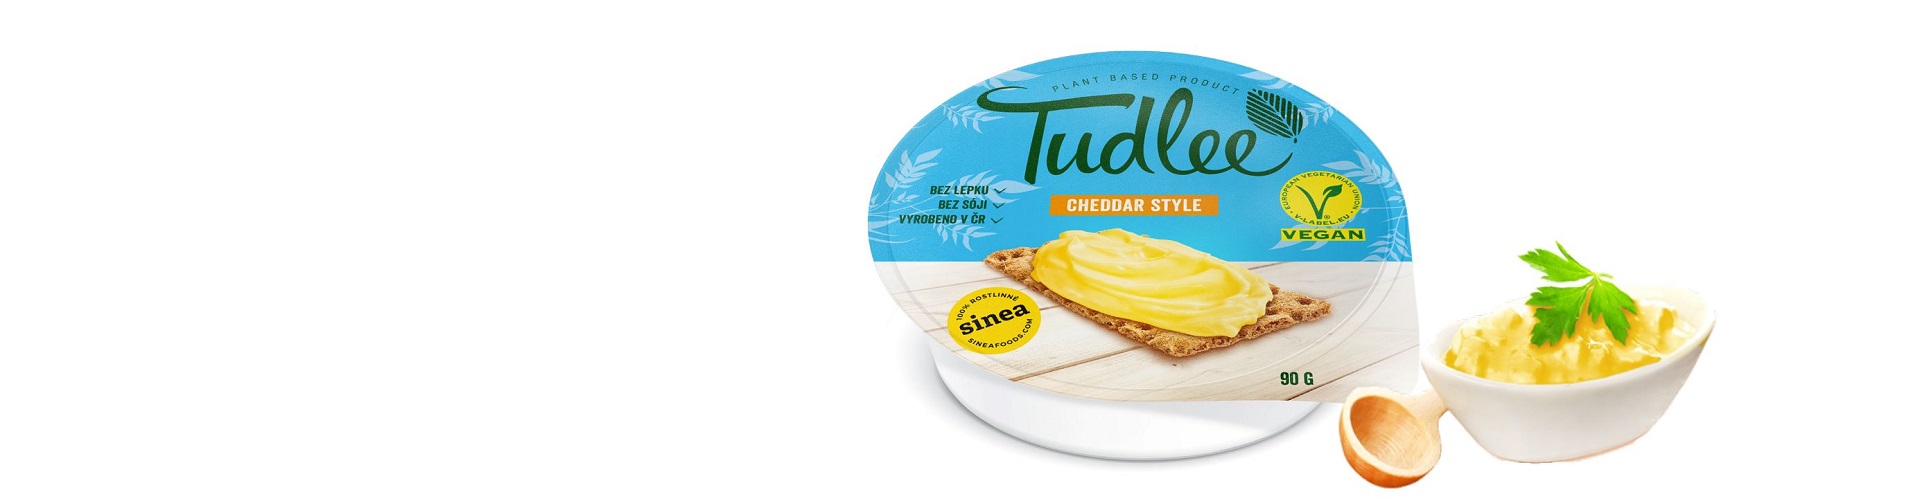 Tudlee plant spreads Cheddar style.